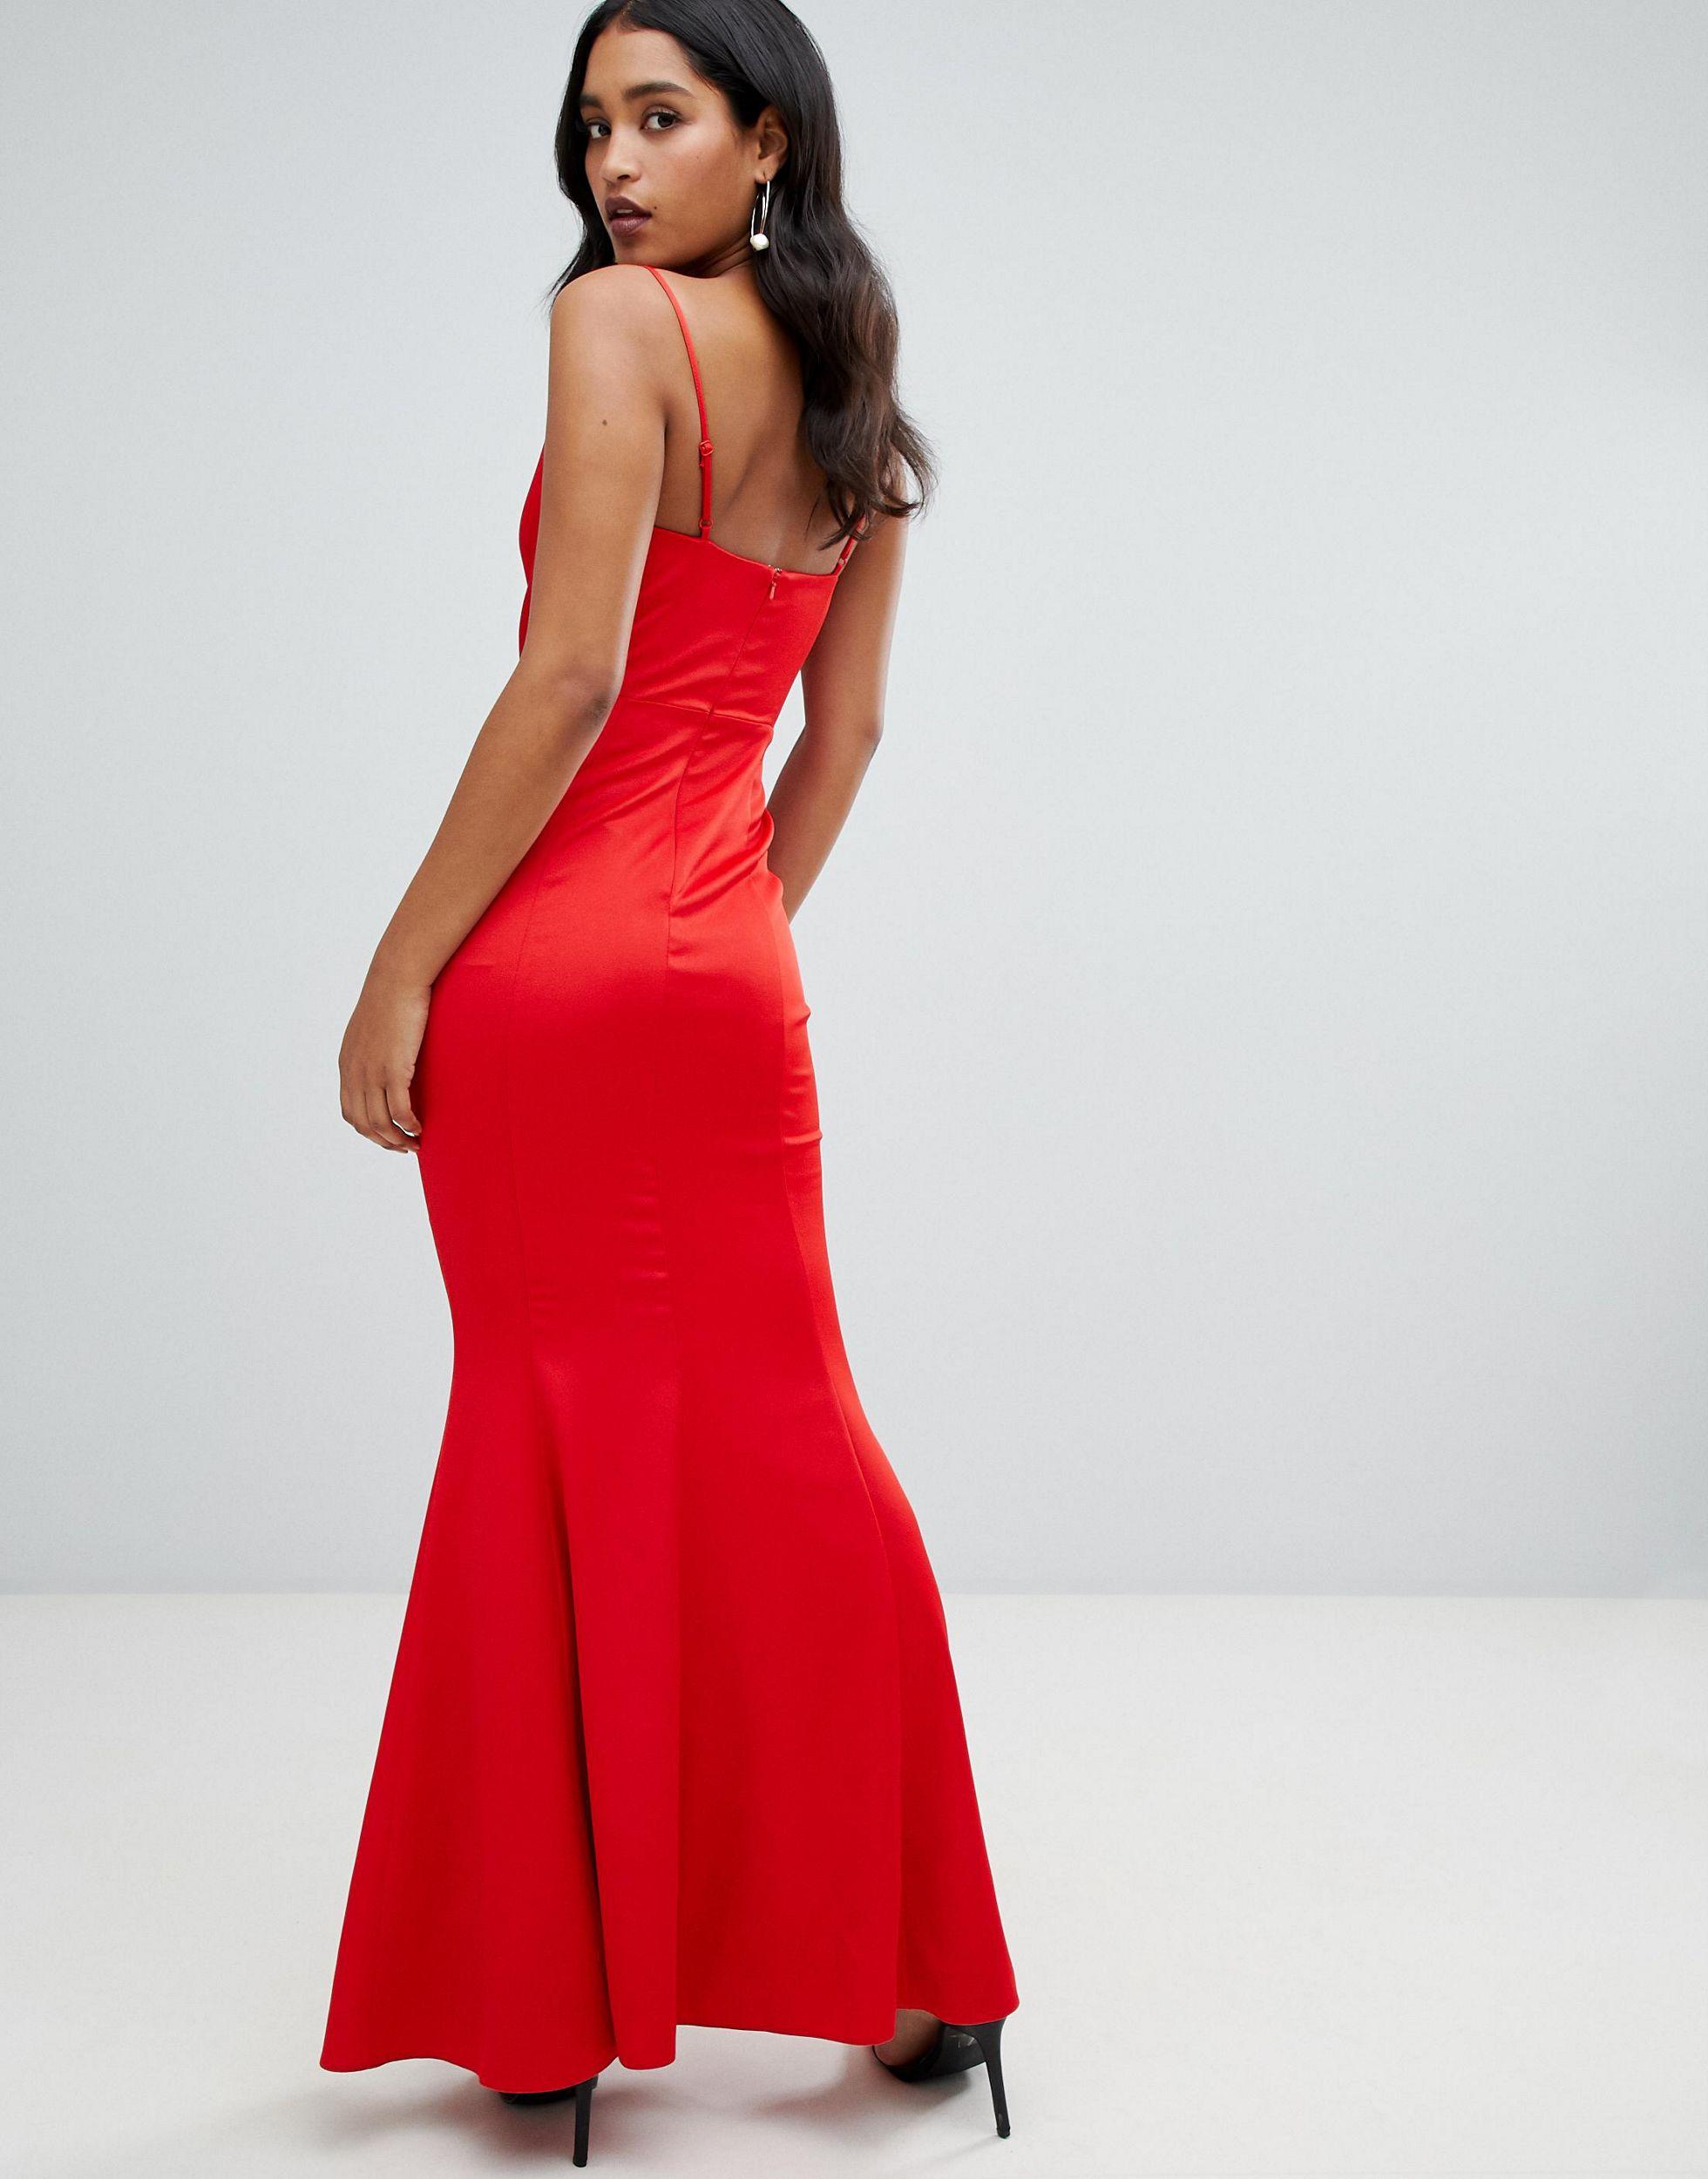 Lipsy Synthetic Cowl Neck Maxi Dress in Red - Lyst